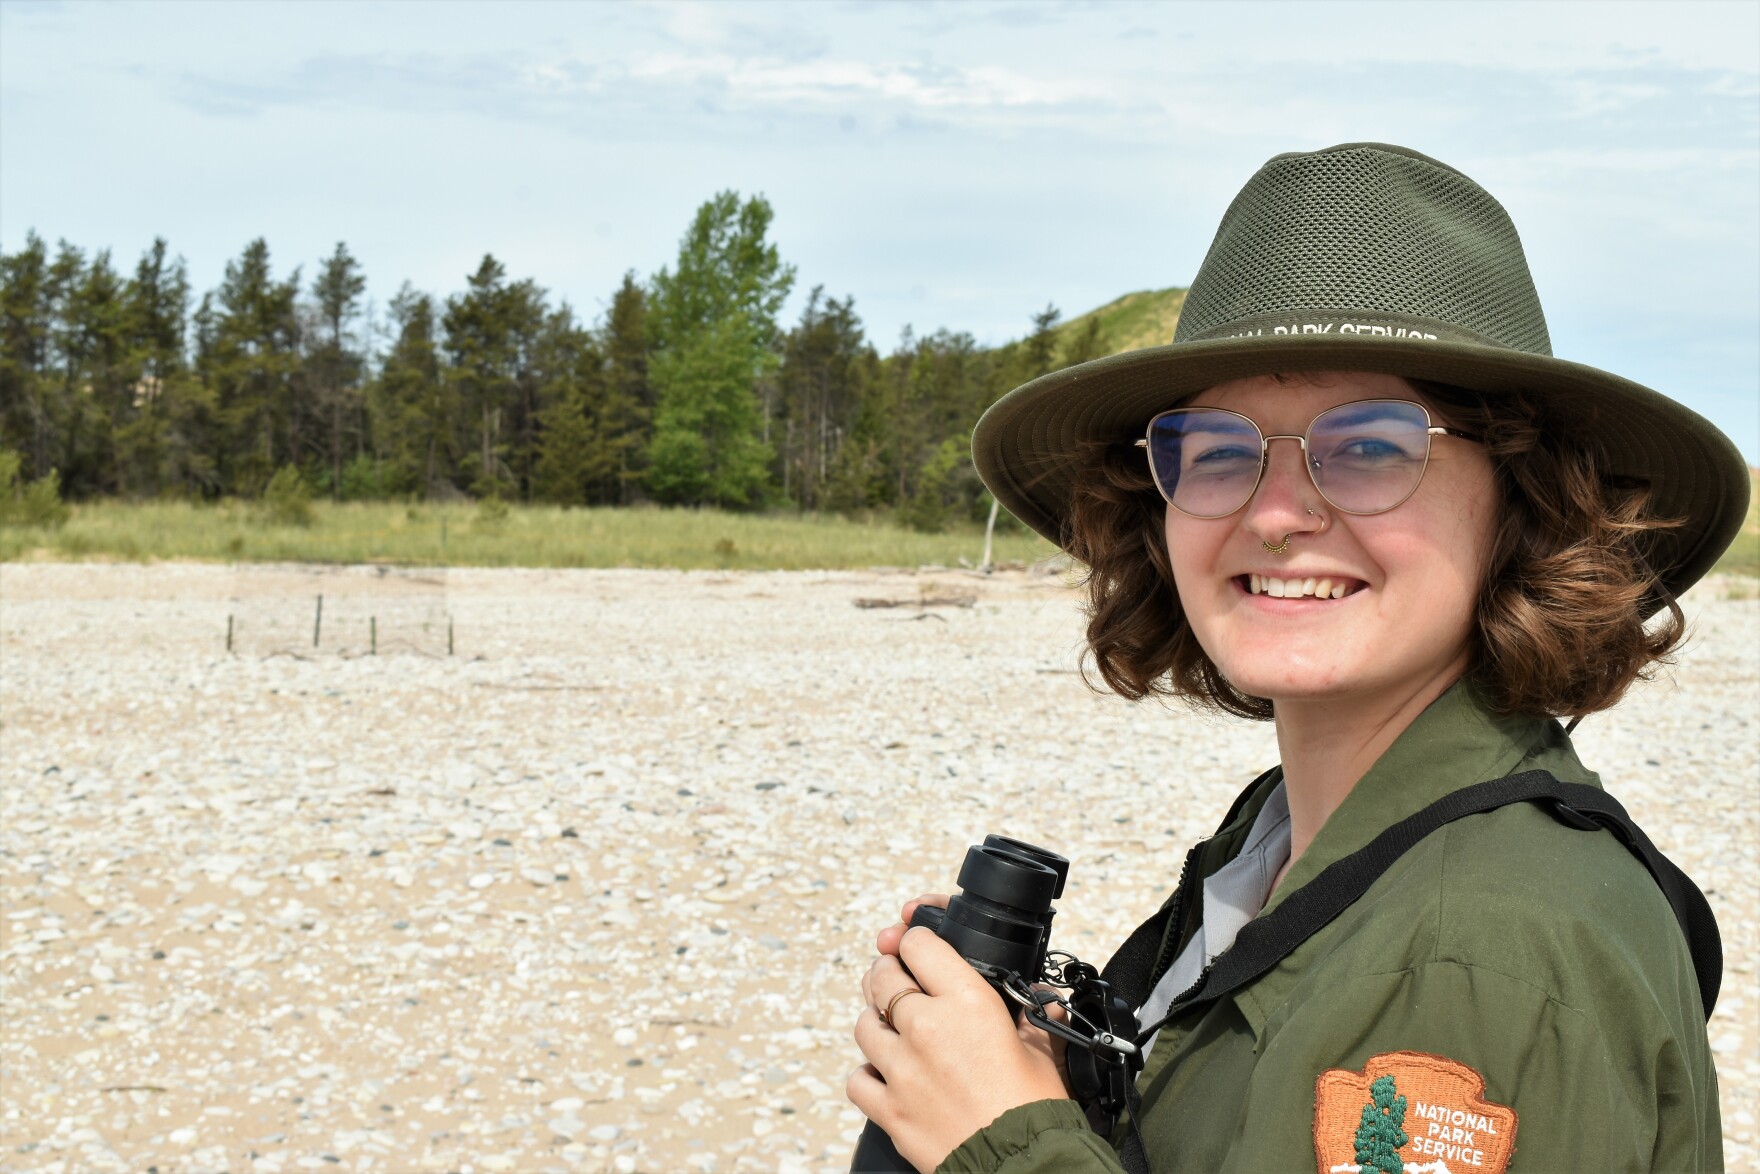 a young white person wearing a national park service uniform smiles at the camera while holding binoculars on the beach